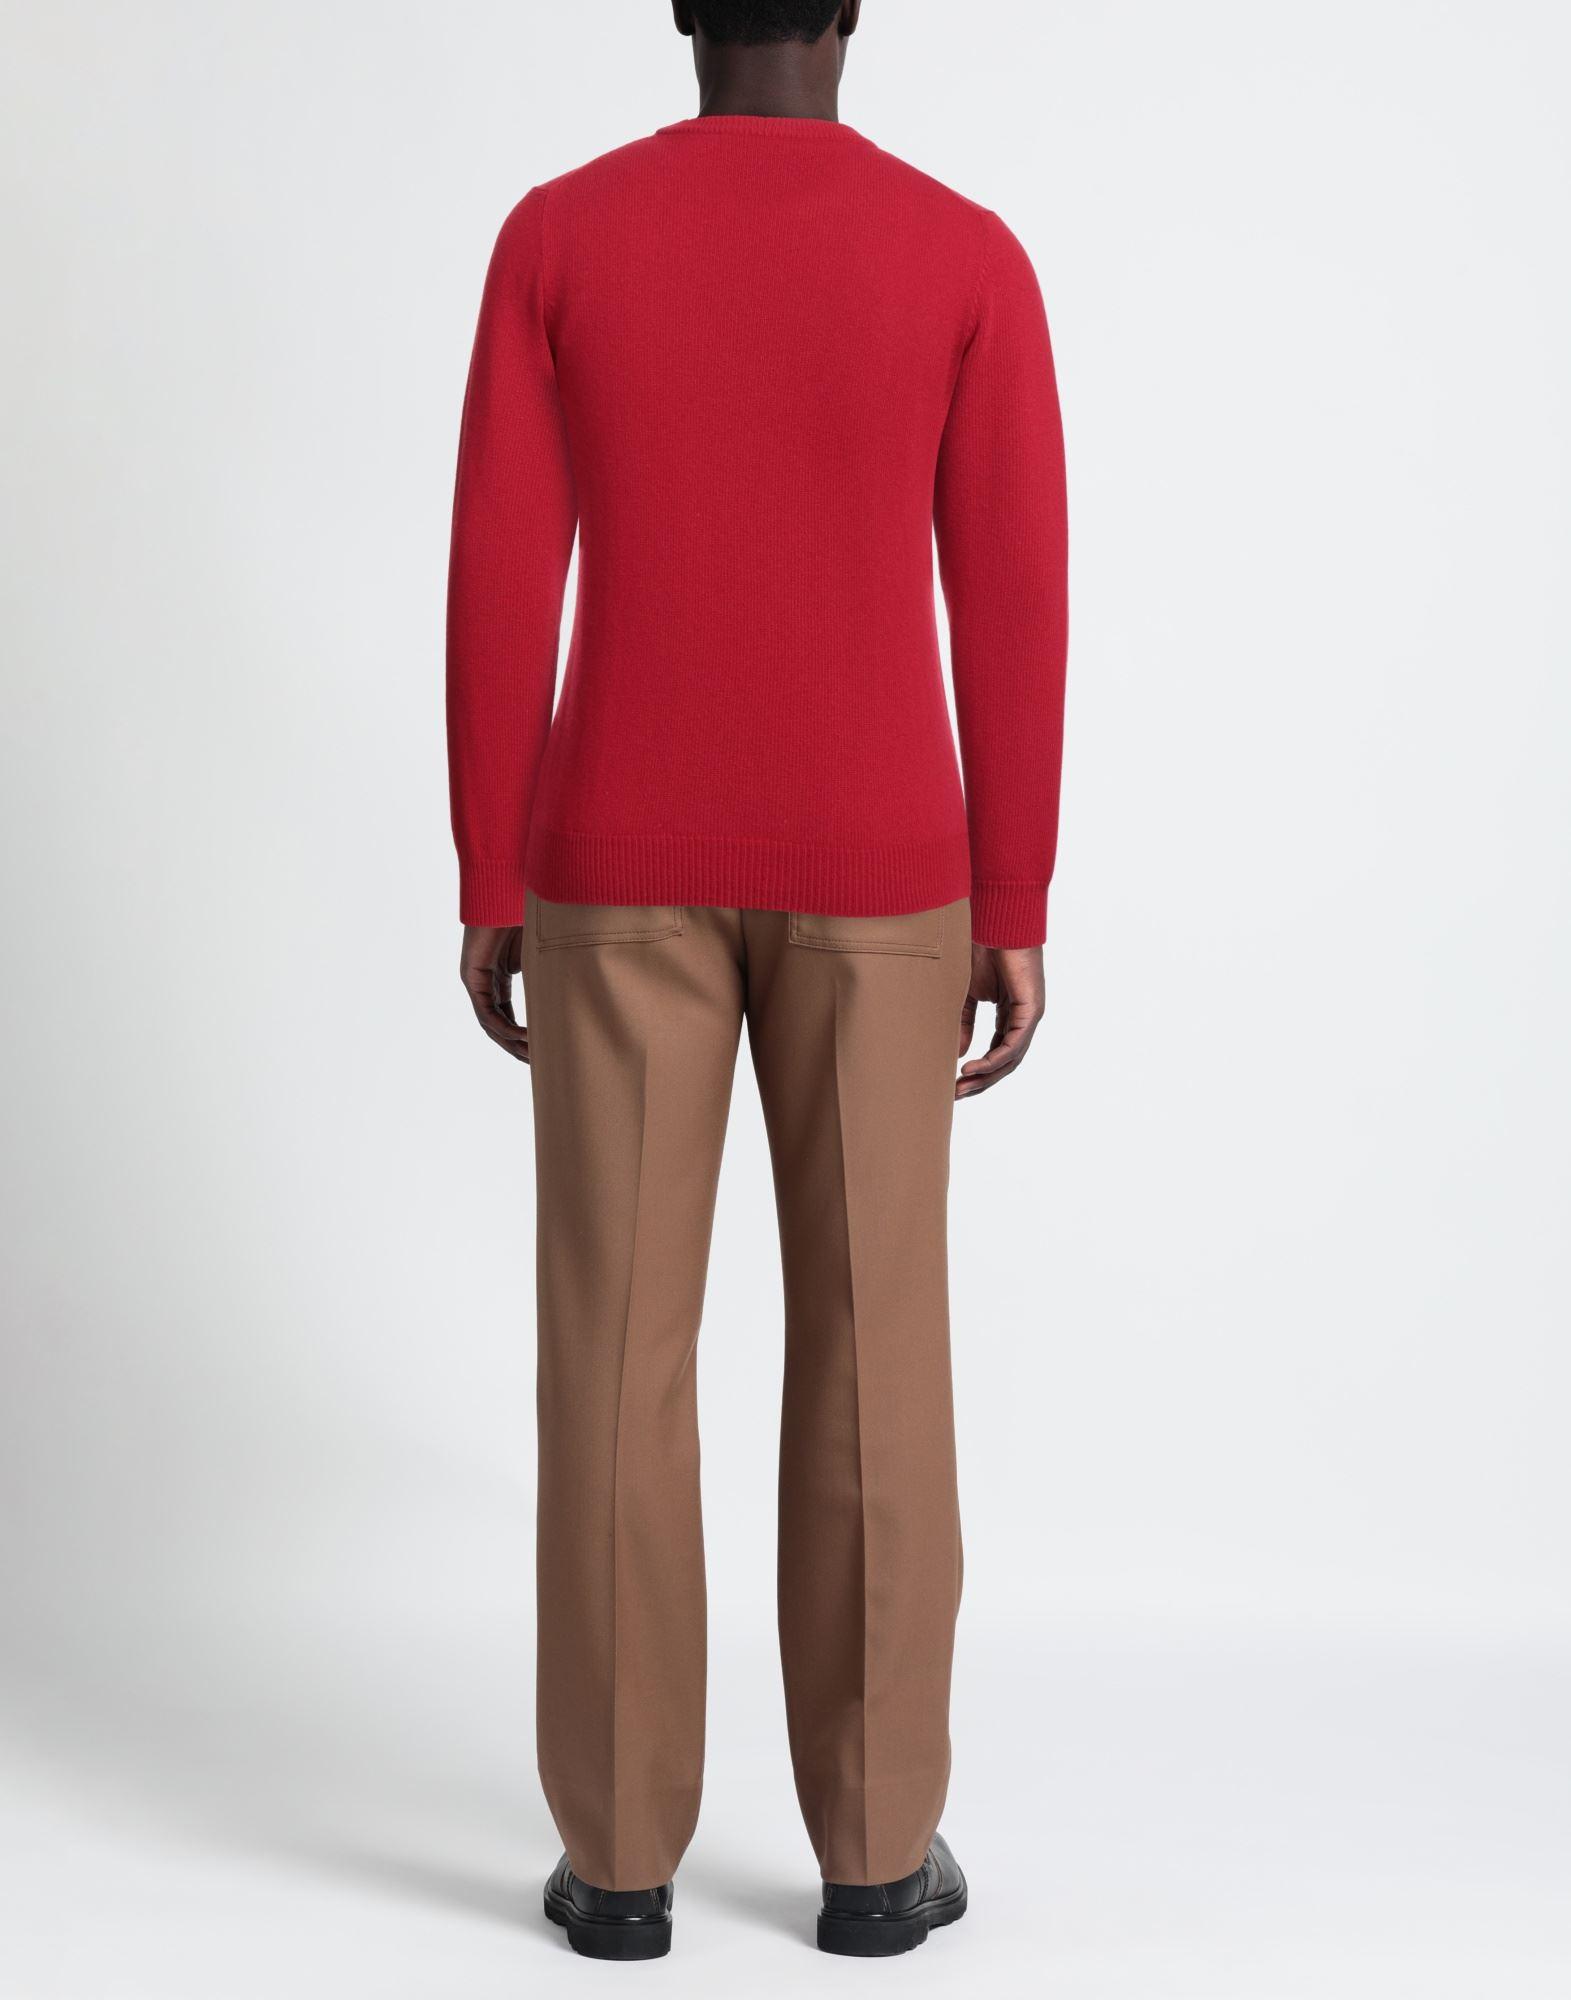 Abkost Sweater in Red for Men | Lyst